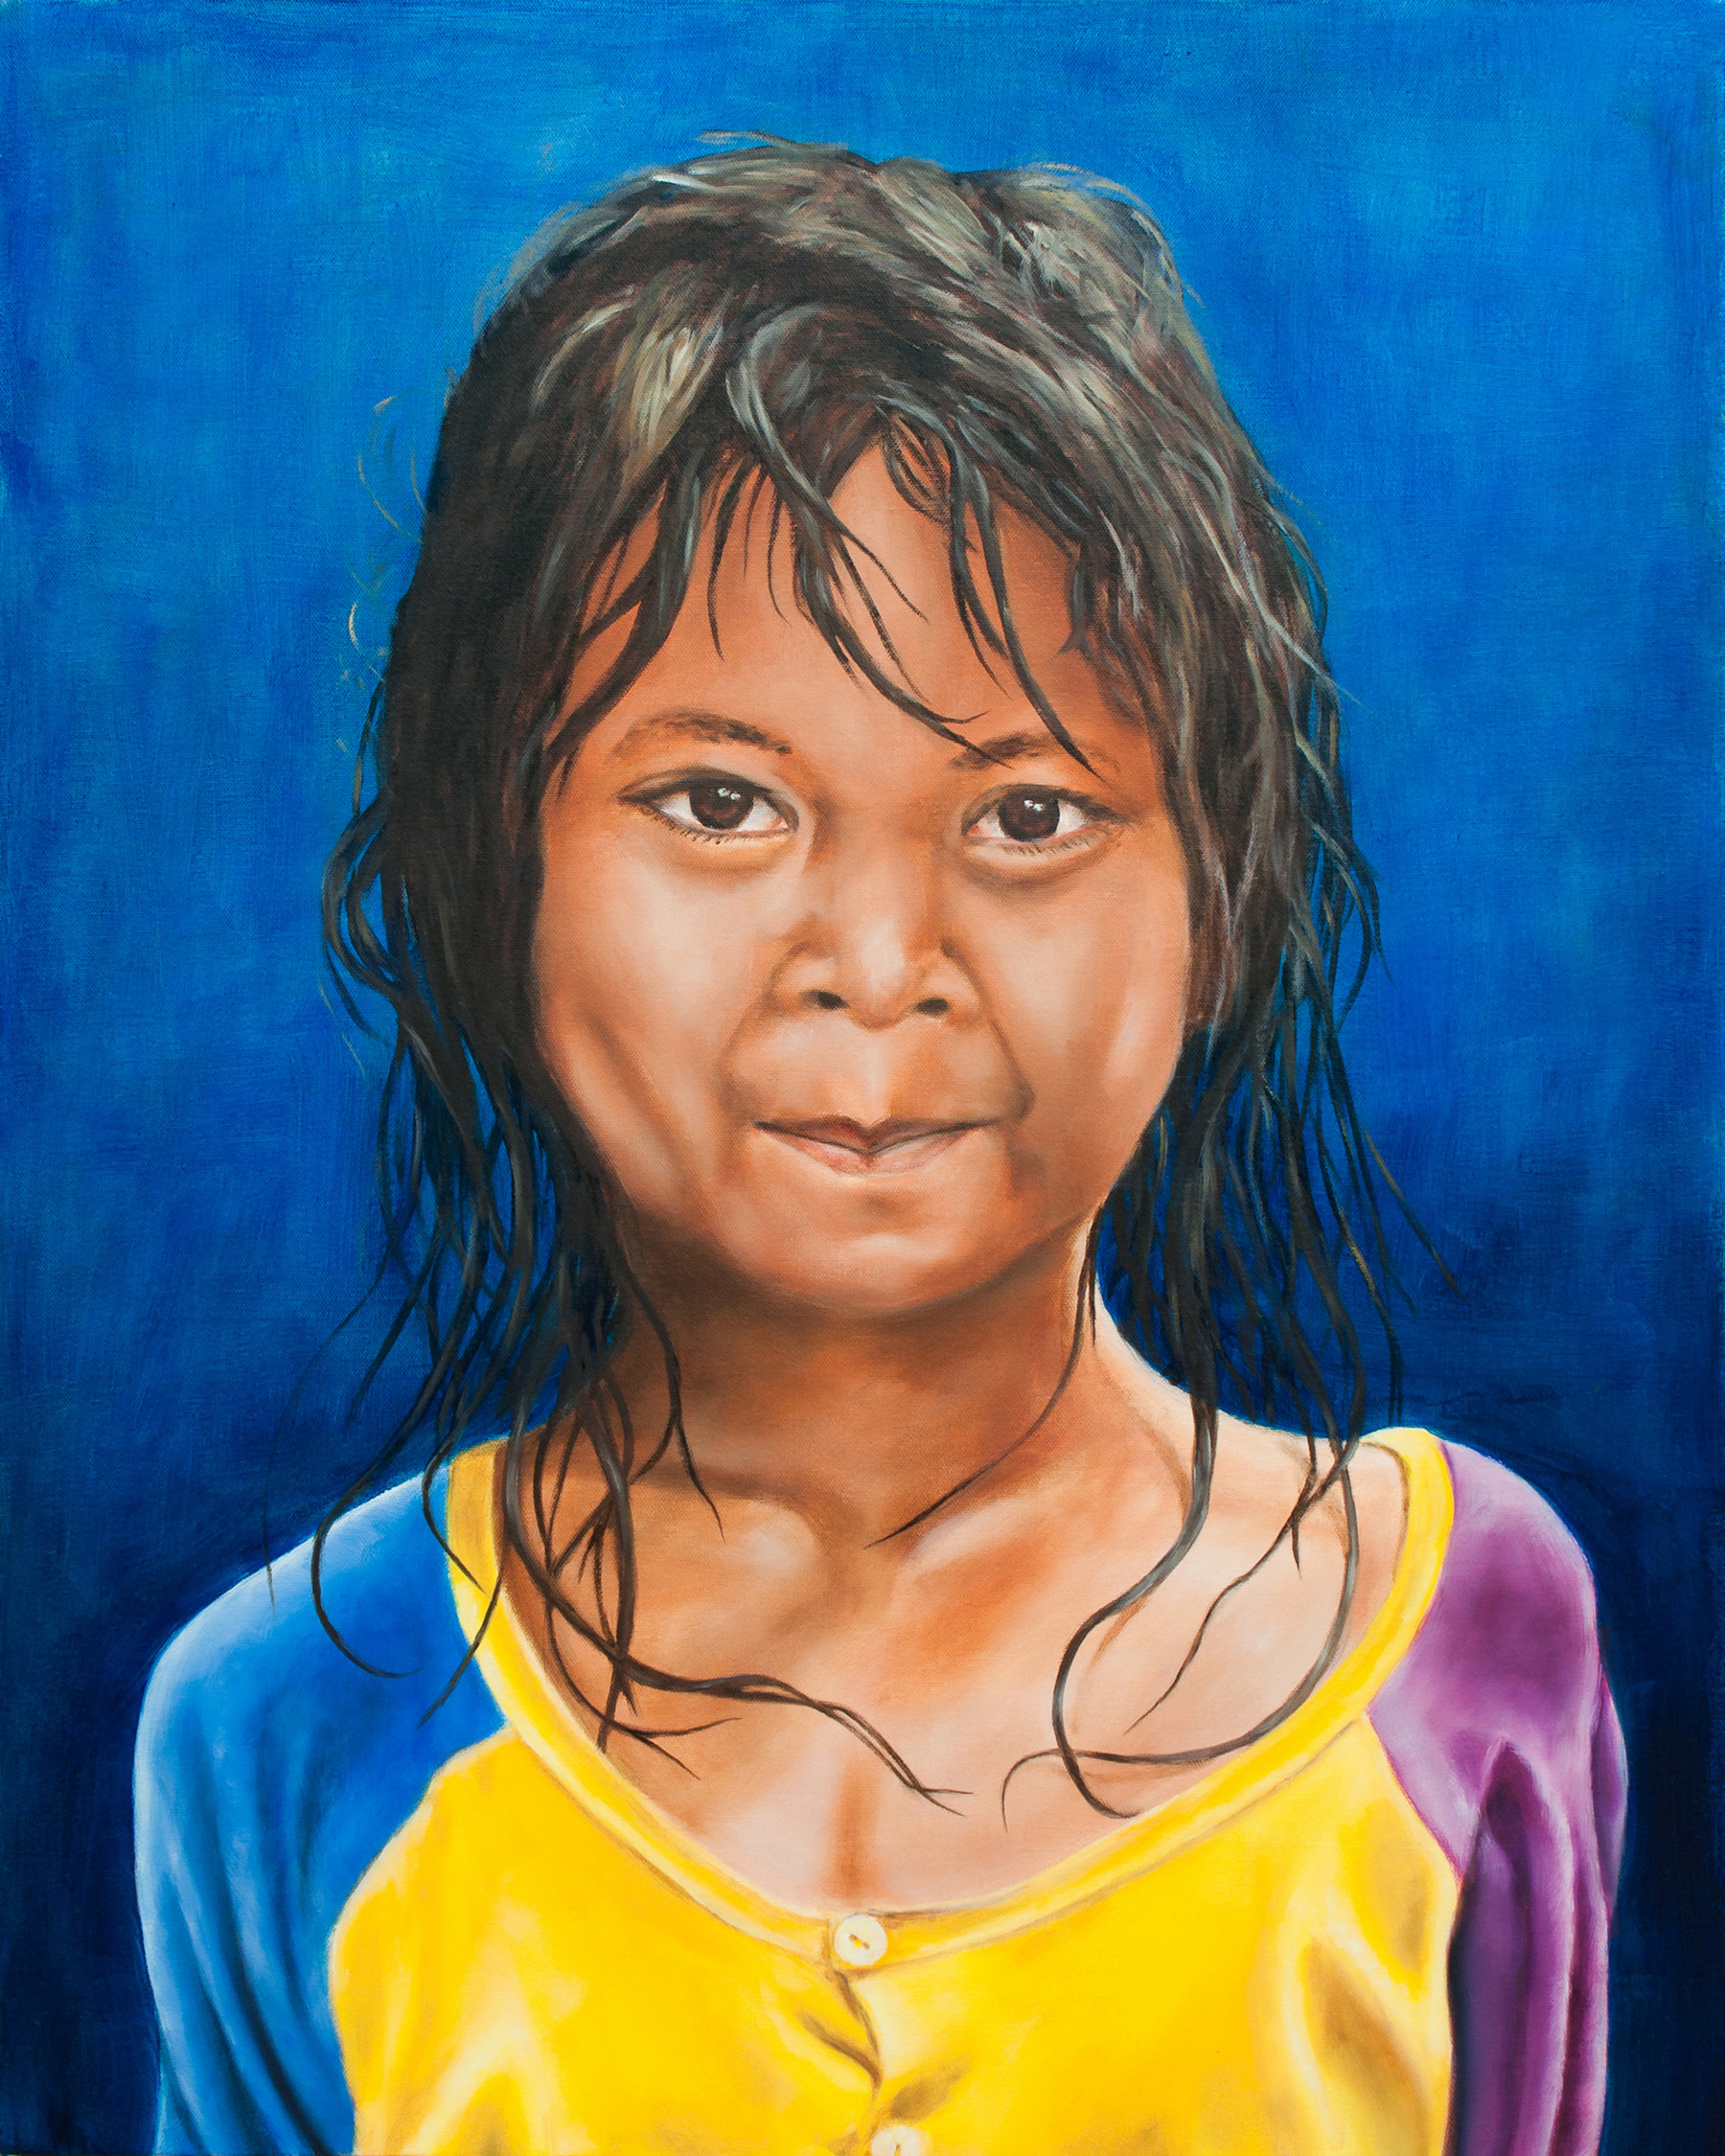 Cambodian Girl, oil on canvas by Robert Markey